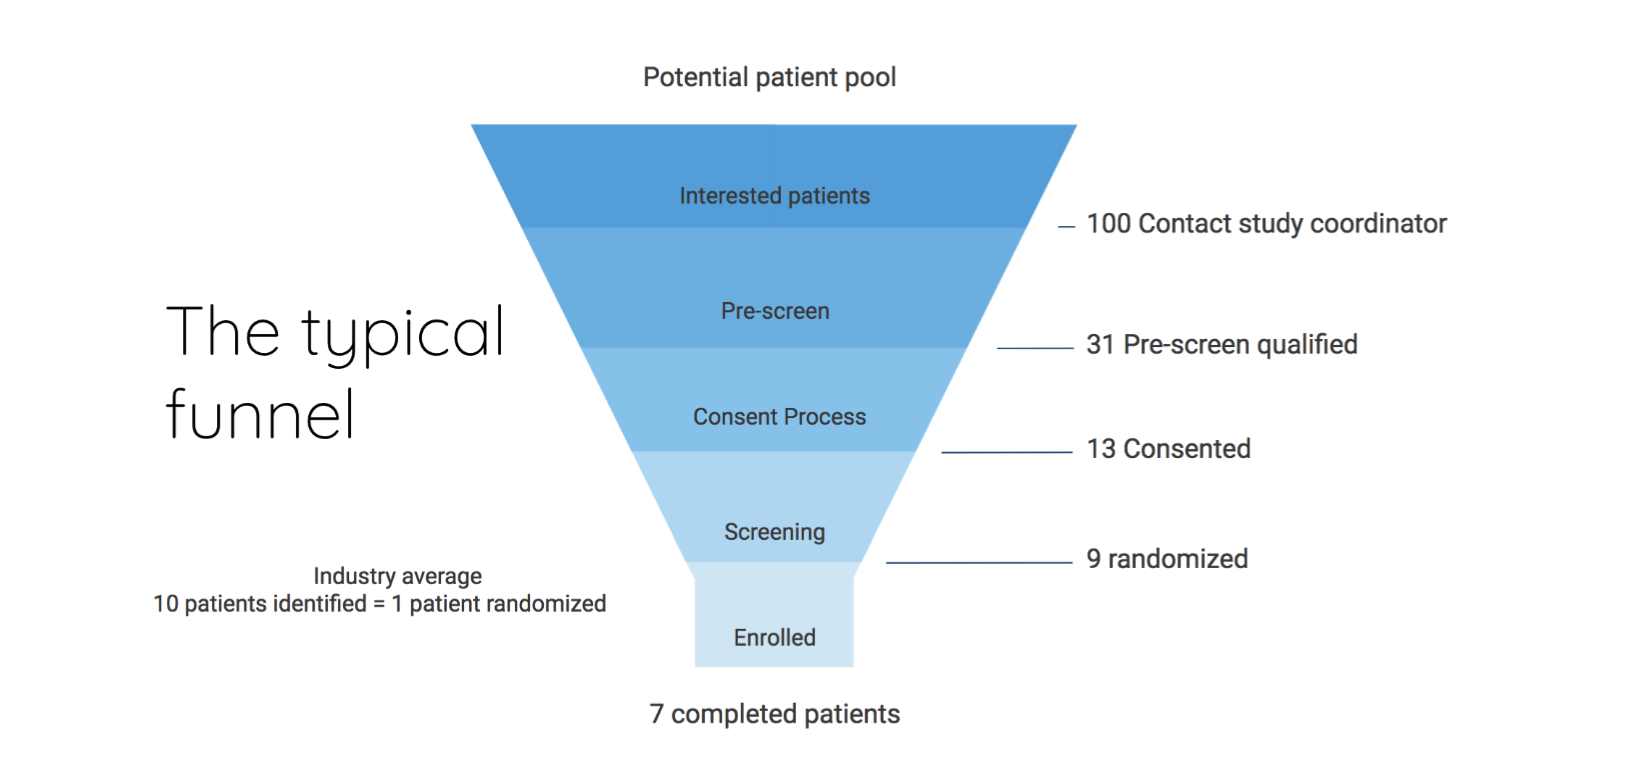 How 21st technology can enable patient-centric enrollment process